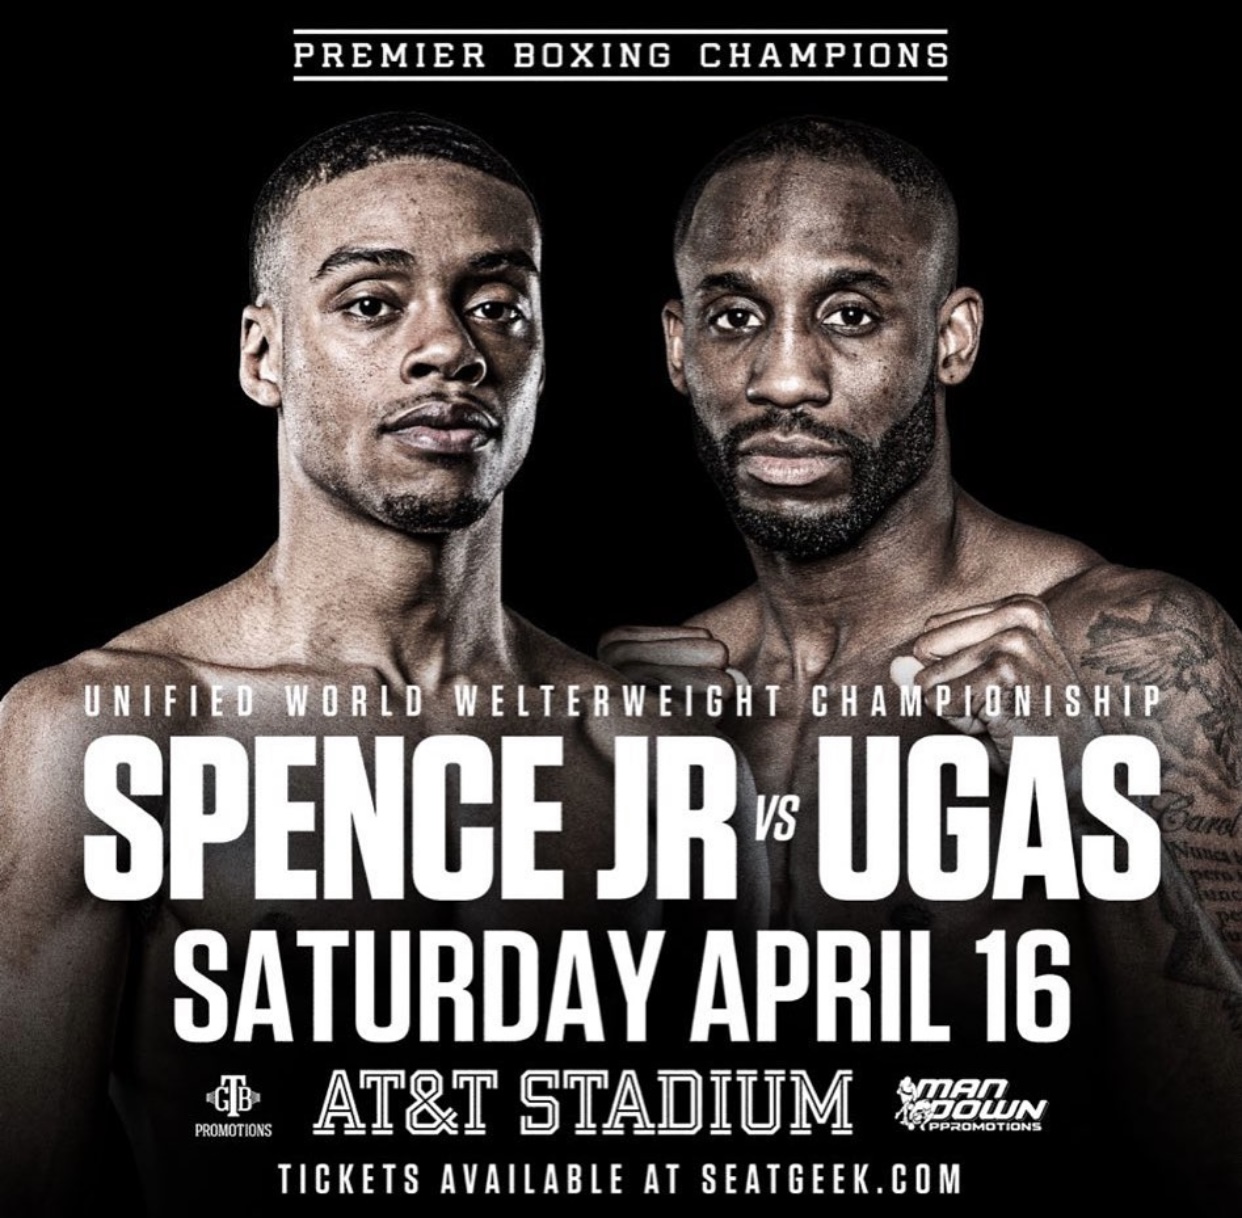 Ugás-Spence to unify on April 16 